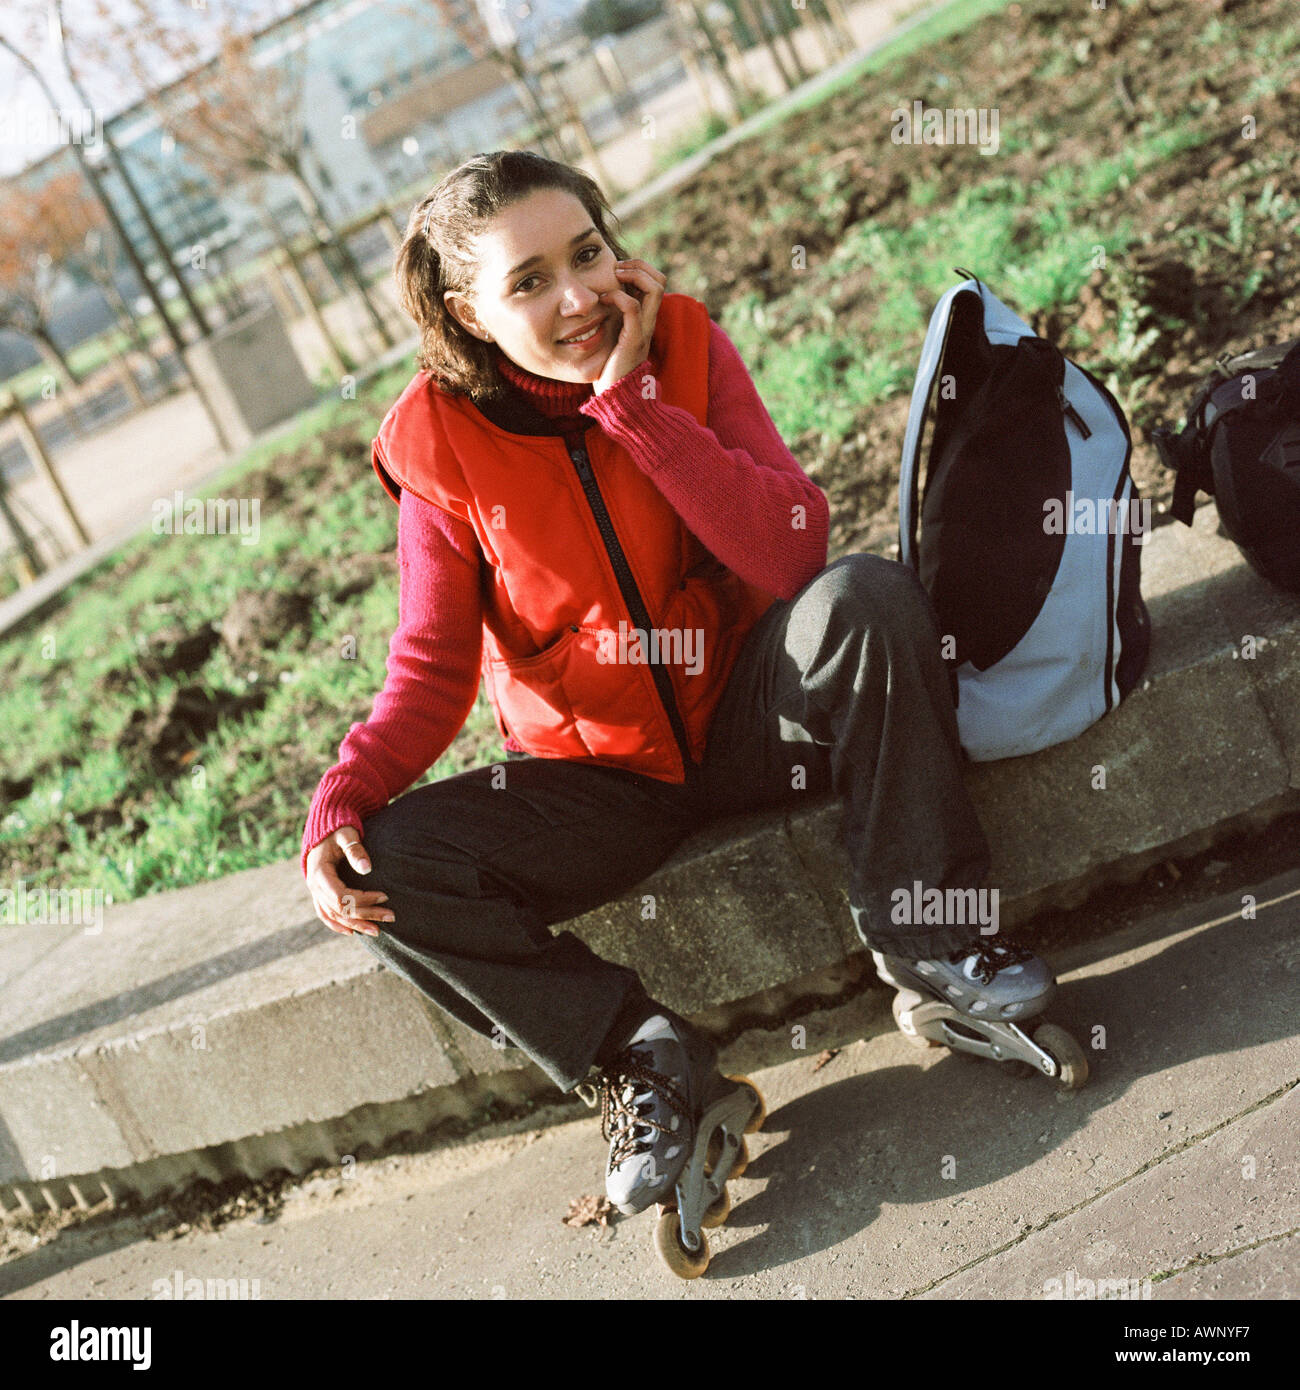 Young woman wearing inline skates, portrait Stock Photo